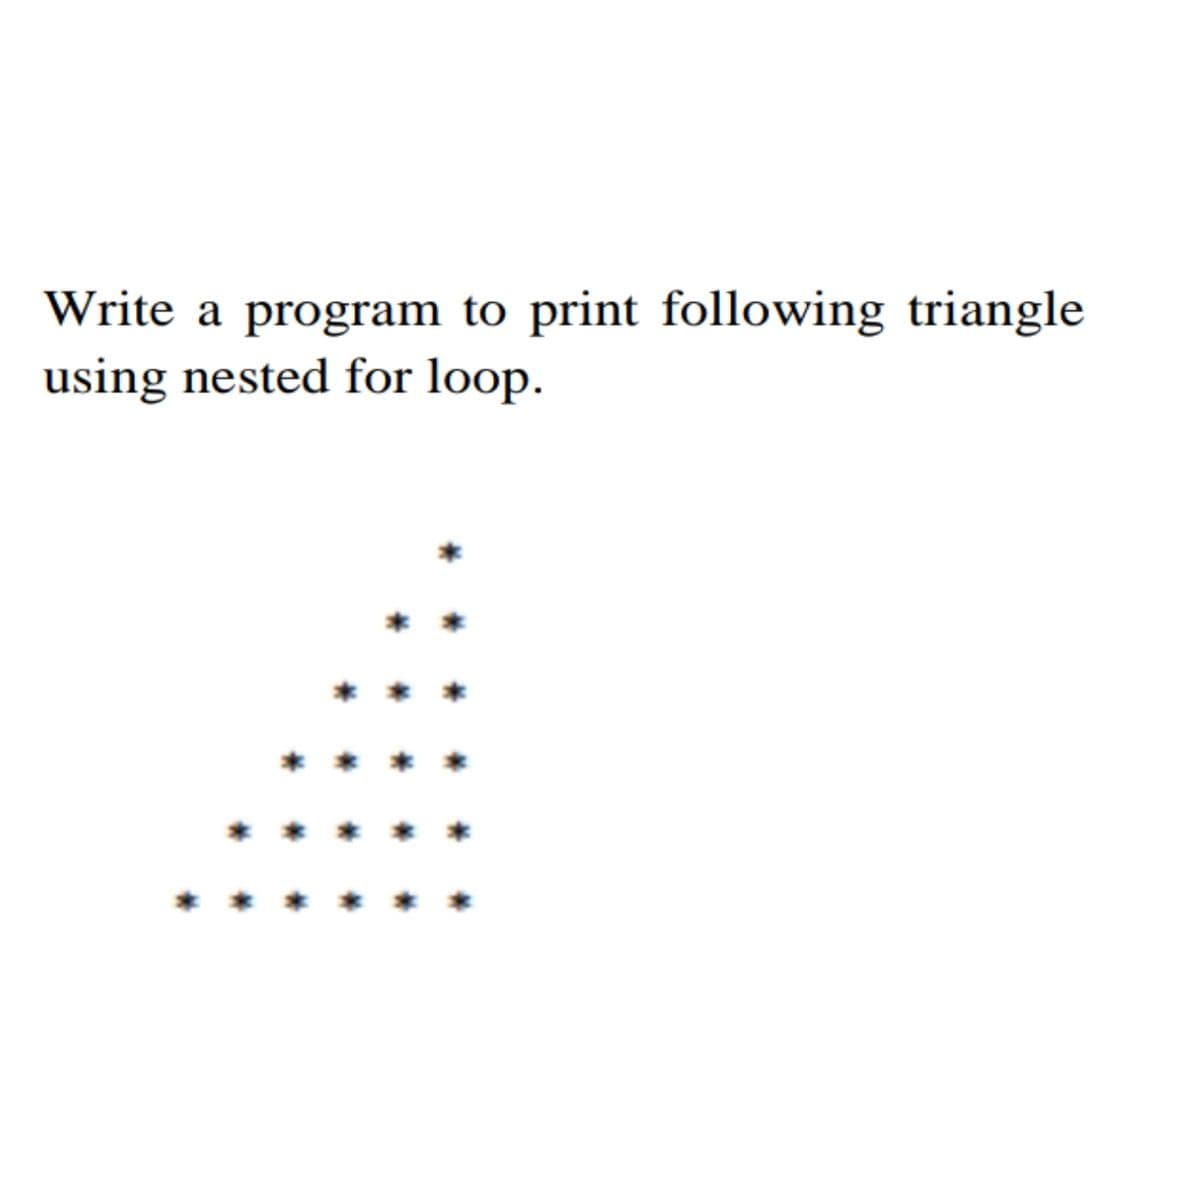 Write a program to print following triangle
using nested for loop.
